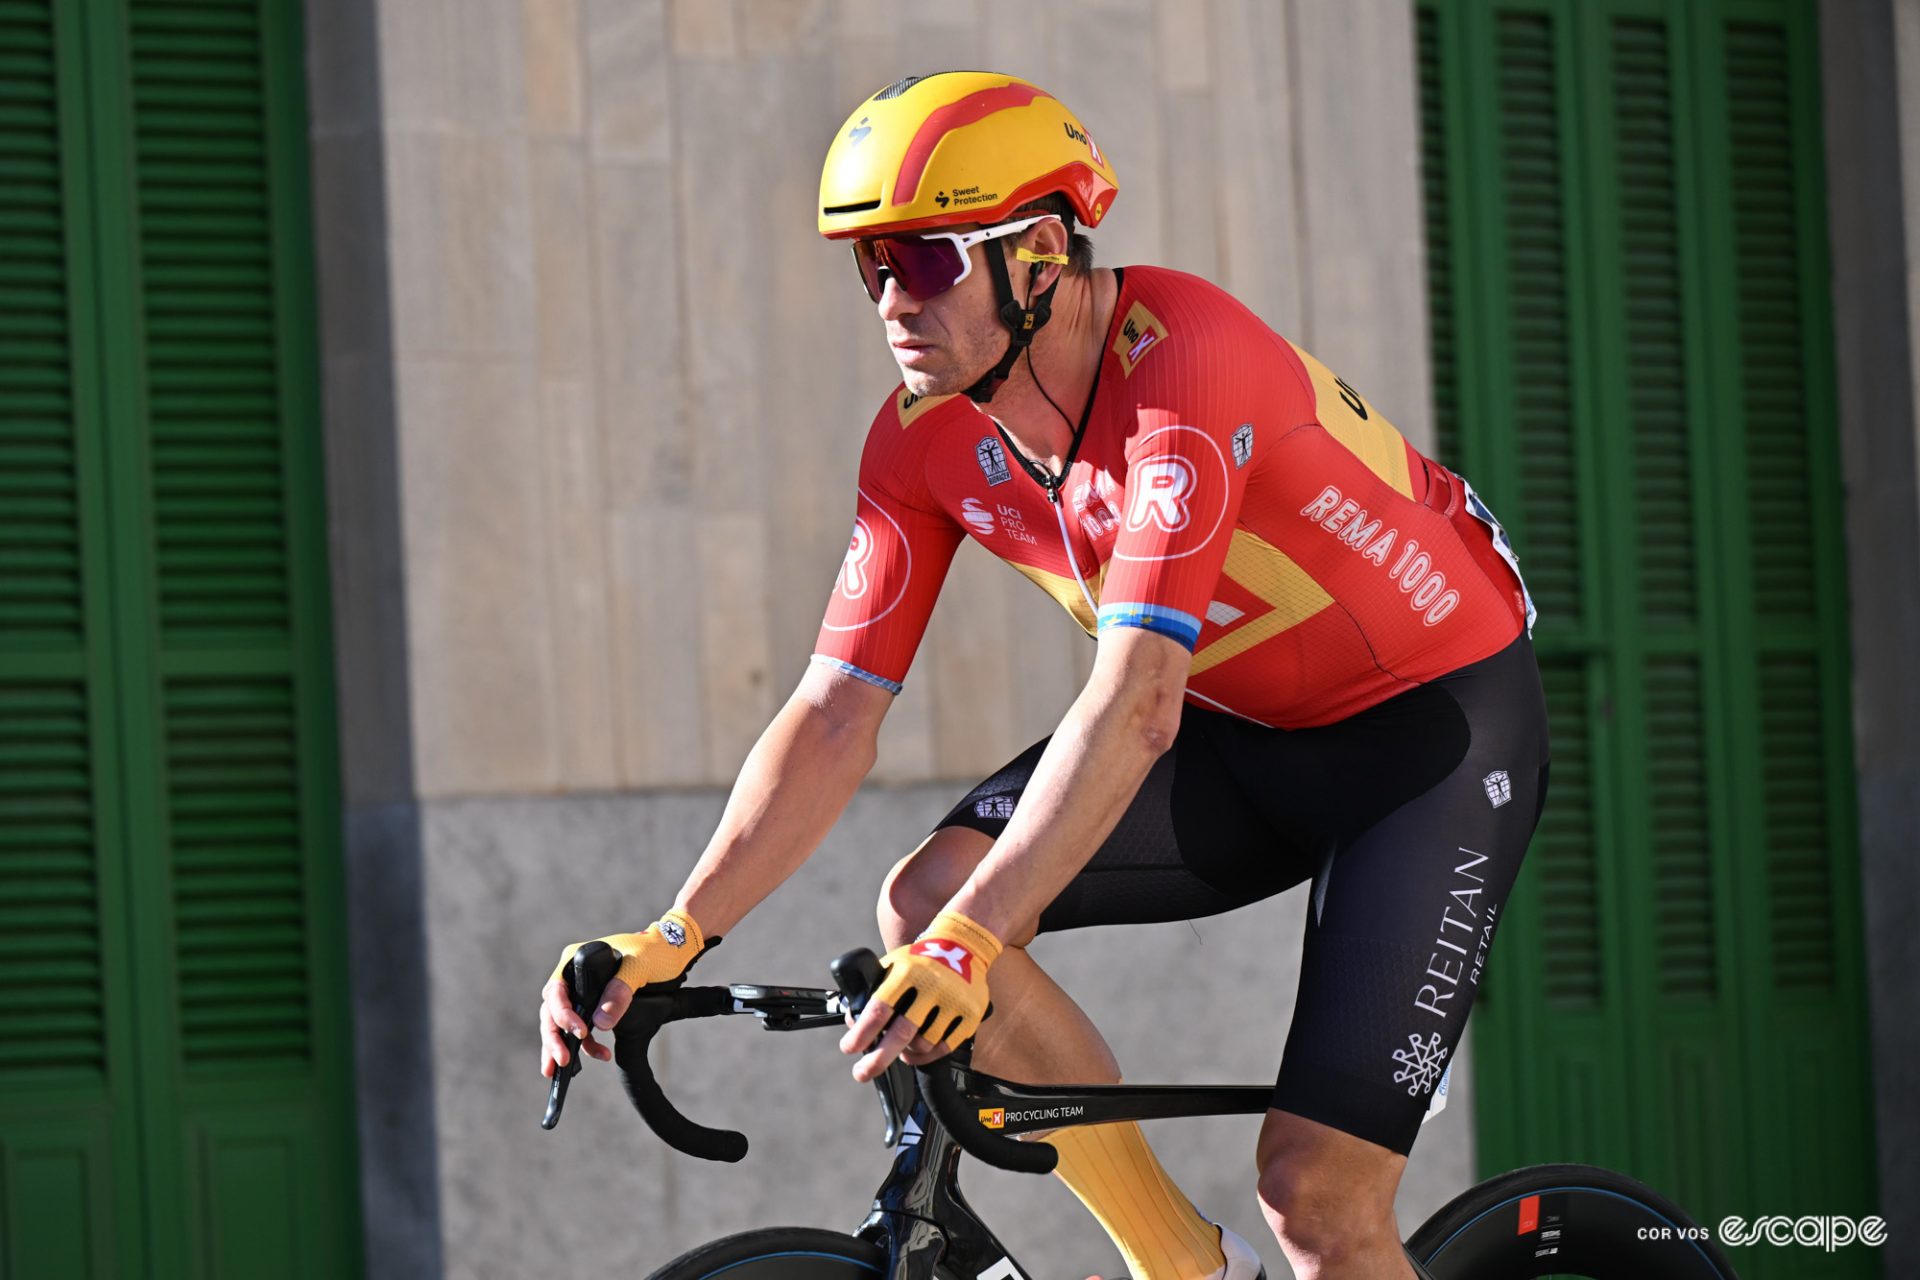 Alexandre Kristoff rides in a spring race in Mallorca. He's all alone in the shot, and has a serious expression on his face as if he's not having much fun.